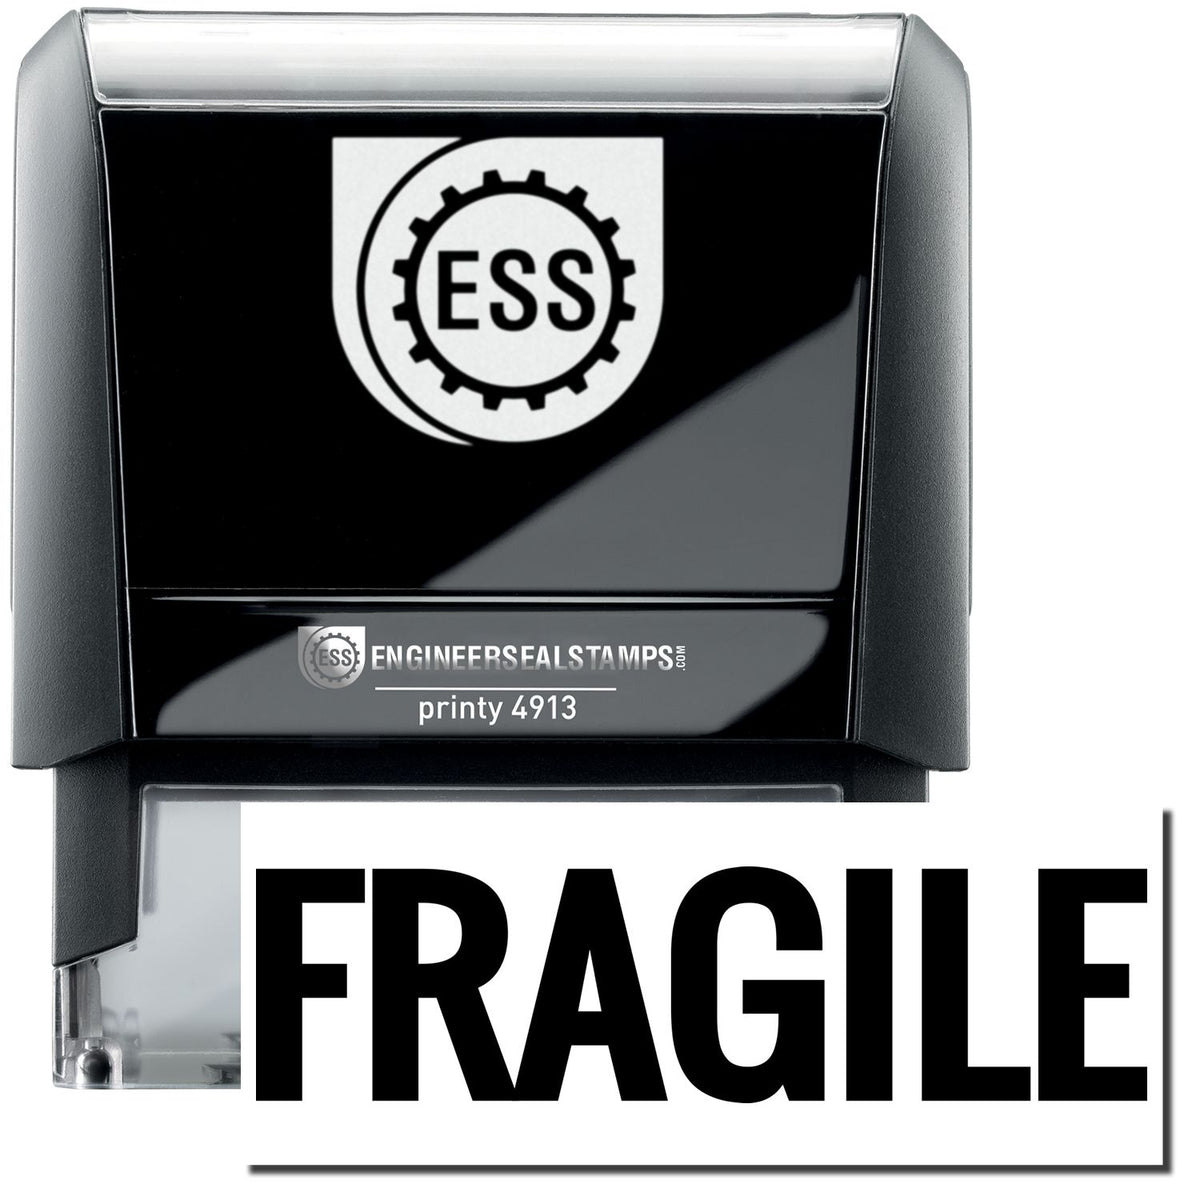 A self-inking stamp with a stamped image showing how the text &quot;FRAGILE&quot; in a large bold font is displayed after stamping.